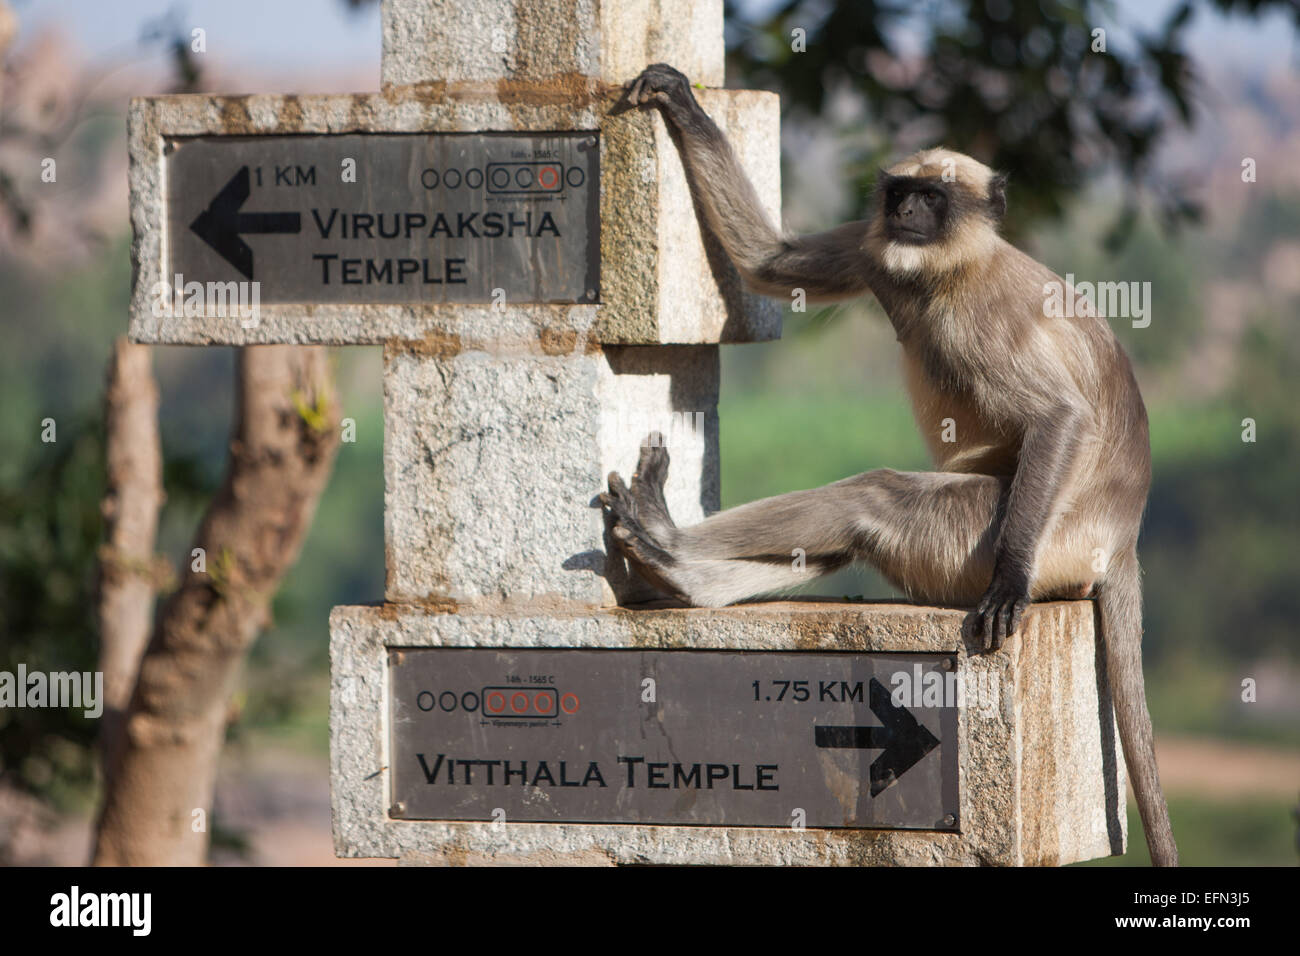 (150208) -- KARNATAKA, Feb. 8, 2015 (Xinhua) -- A monkey sits on a direction sign at Hampi in Bellary District of India's state of Karnataka, Feb. 7, 2015. Nicknamed as 'Hampi: The Lost World', the austere, grandiose site of Hampi was the last capital of the last great Hindu Kingdom of Vijayanagar. Its fabulously rich princes built Dravidian temples and palaces which won the admiration of travellers between the 14th and 16th centuries. Conquered by the Deccan Muslim confederacy in 1565, the city was pillaged over a period of six months before being abandoned. The Groups of Monuments at Hampi w Stock Photo